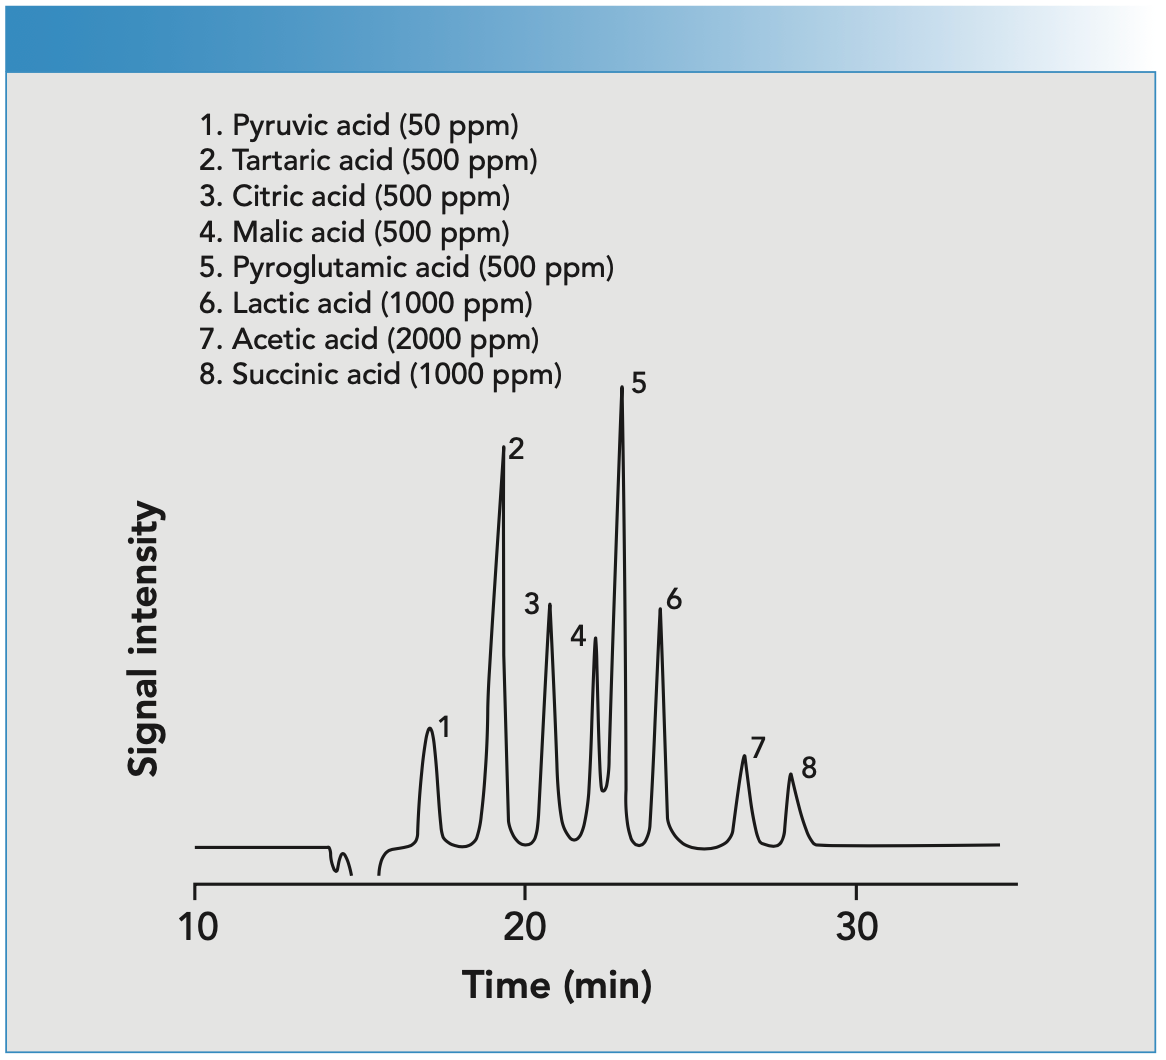 FIGURE 1: HPLC chromatogram of the organic acid content in finished beer using perchloric acid as an eluent (mobile phase carrier).